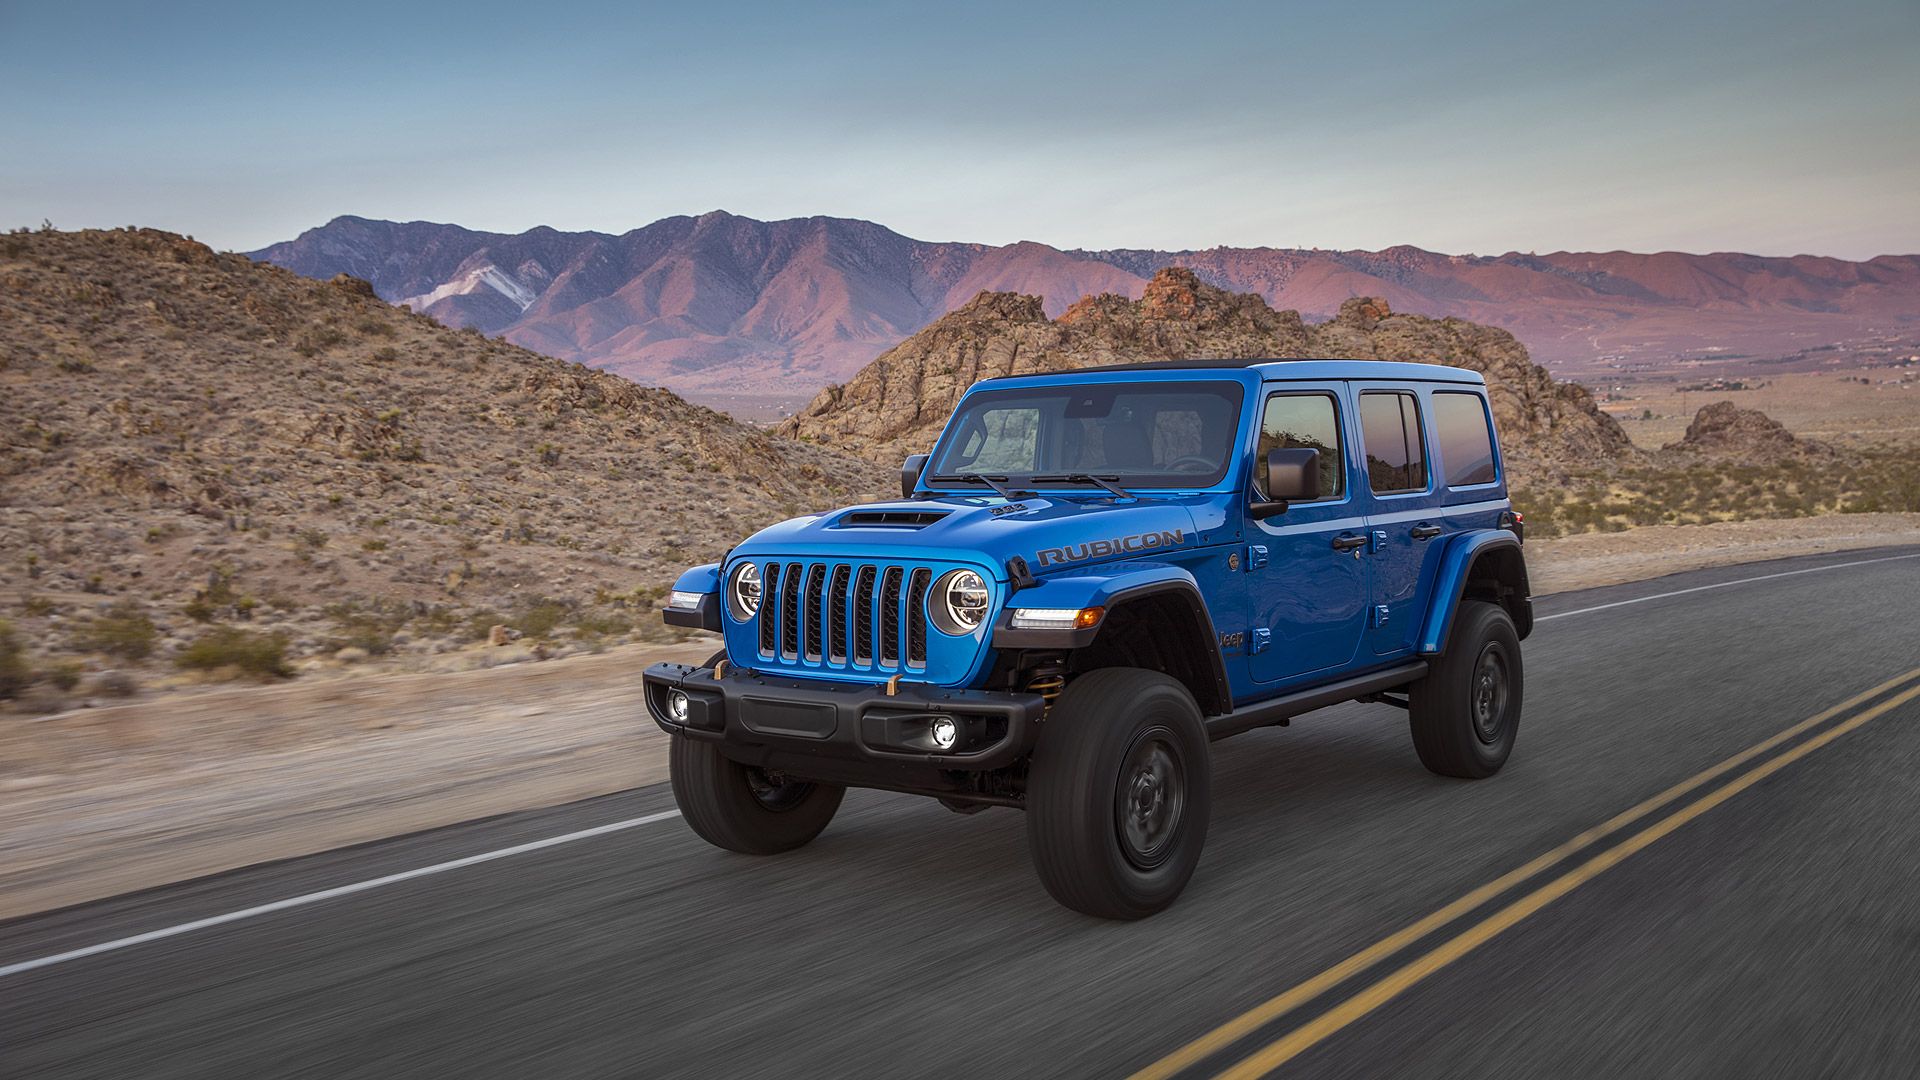 Jeep 2021 Wallpapers - Wallpaper Cave